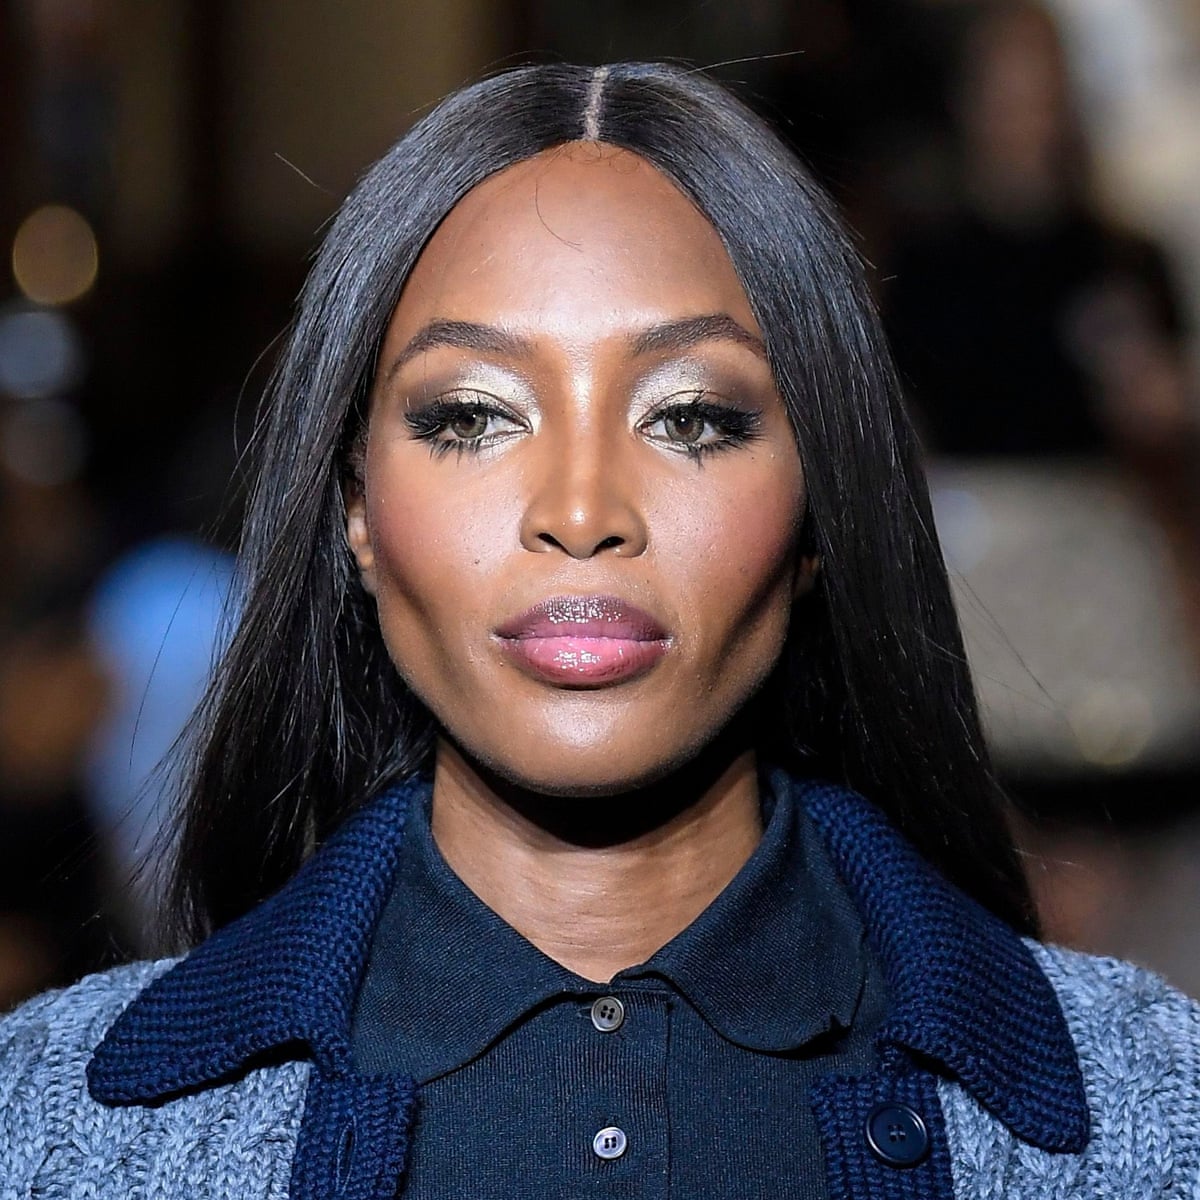 Popular actress welcomes her first child at 50; surprises fans with new-born's viral pic ft Naomi Campbell